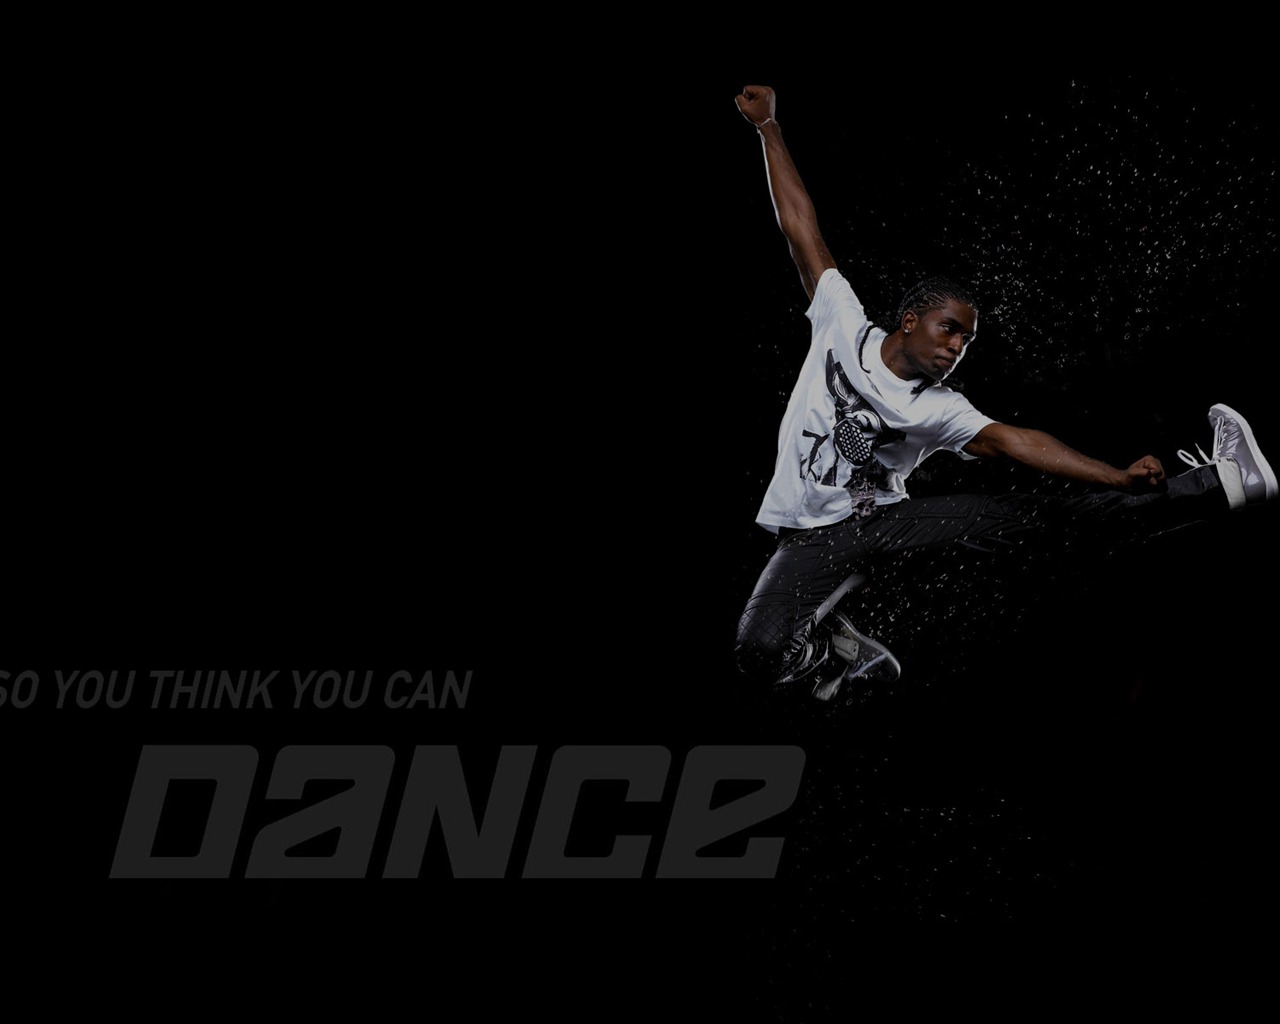 So You Think You Can Dance wallpaper (2) #4 - 1280x1024